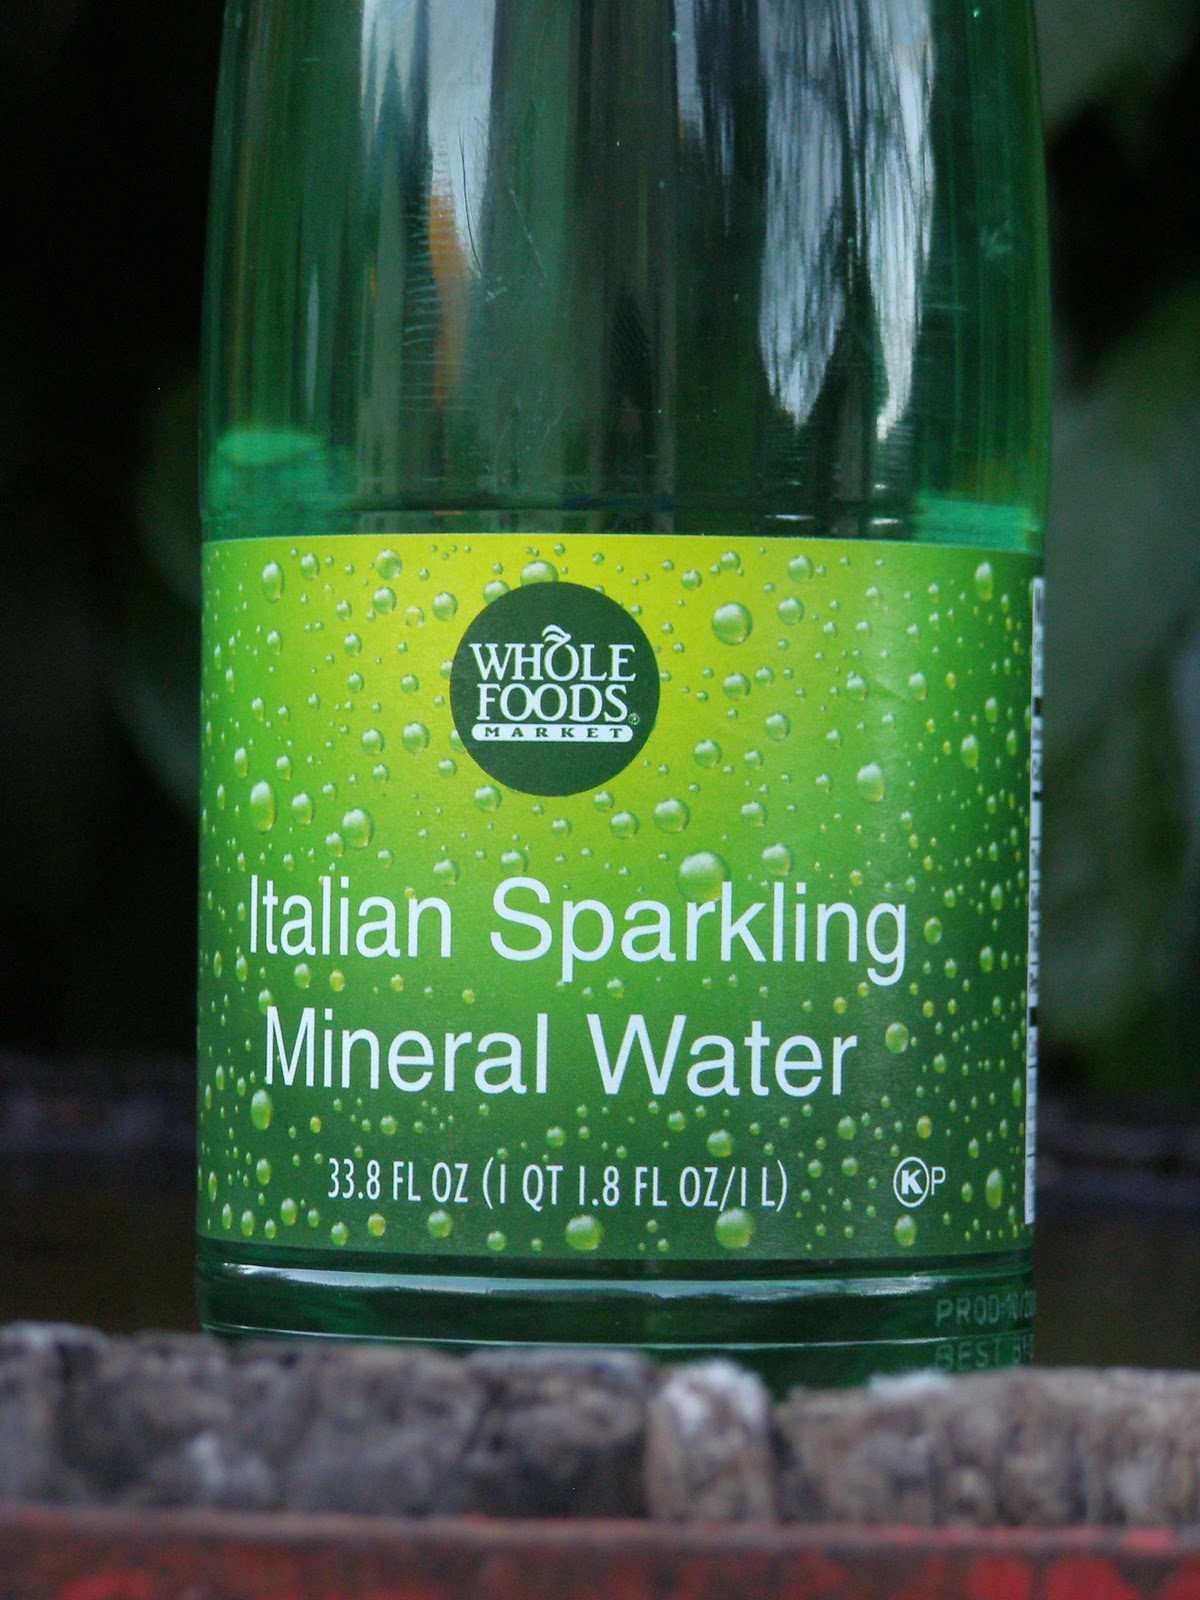 Spring Water In Glass at Whole Foods Market